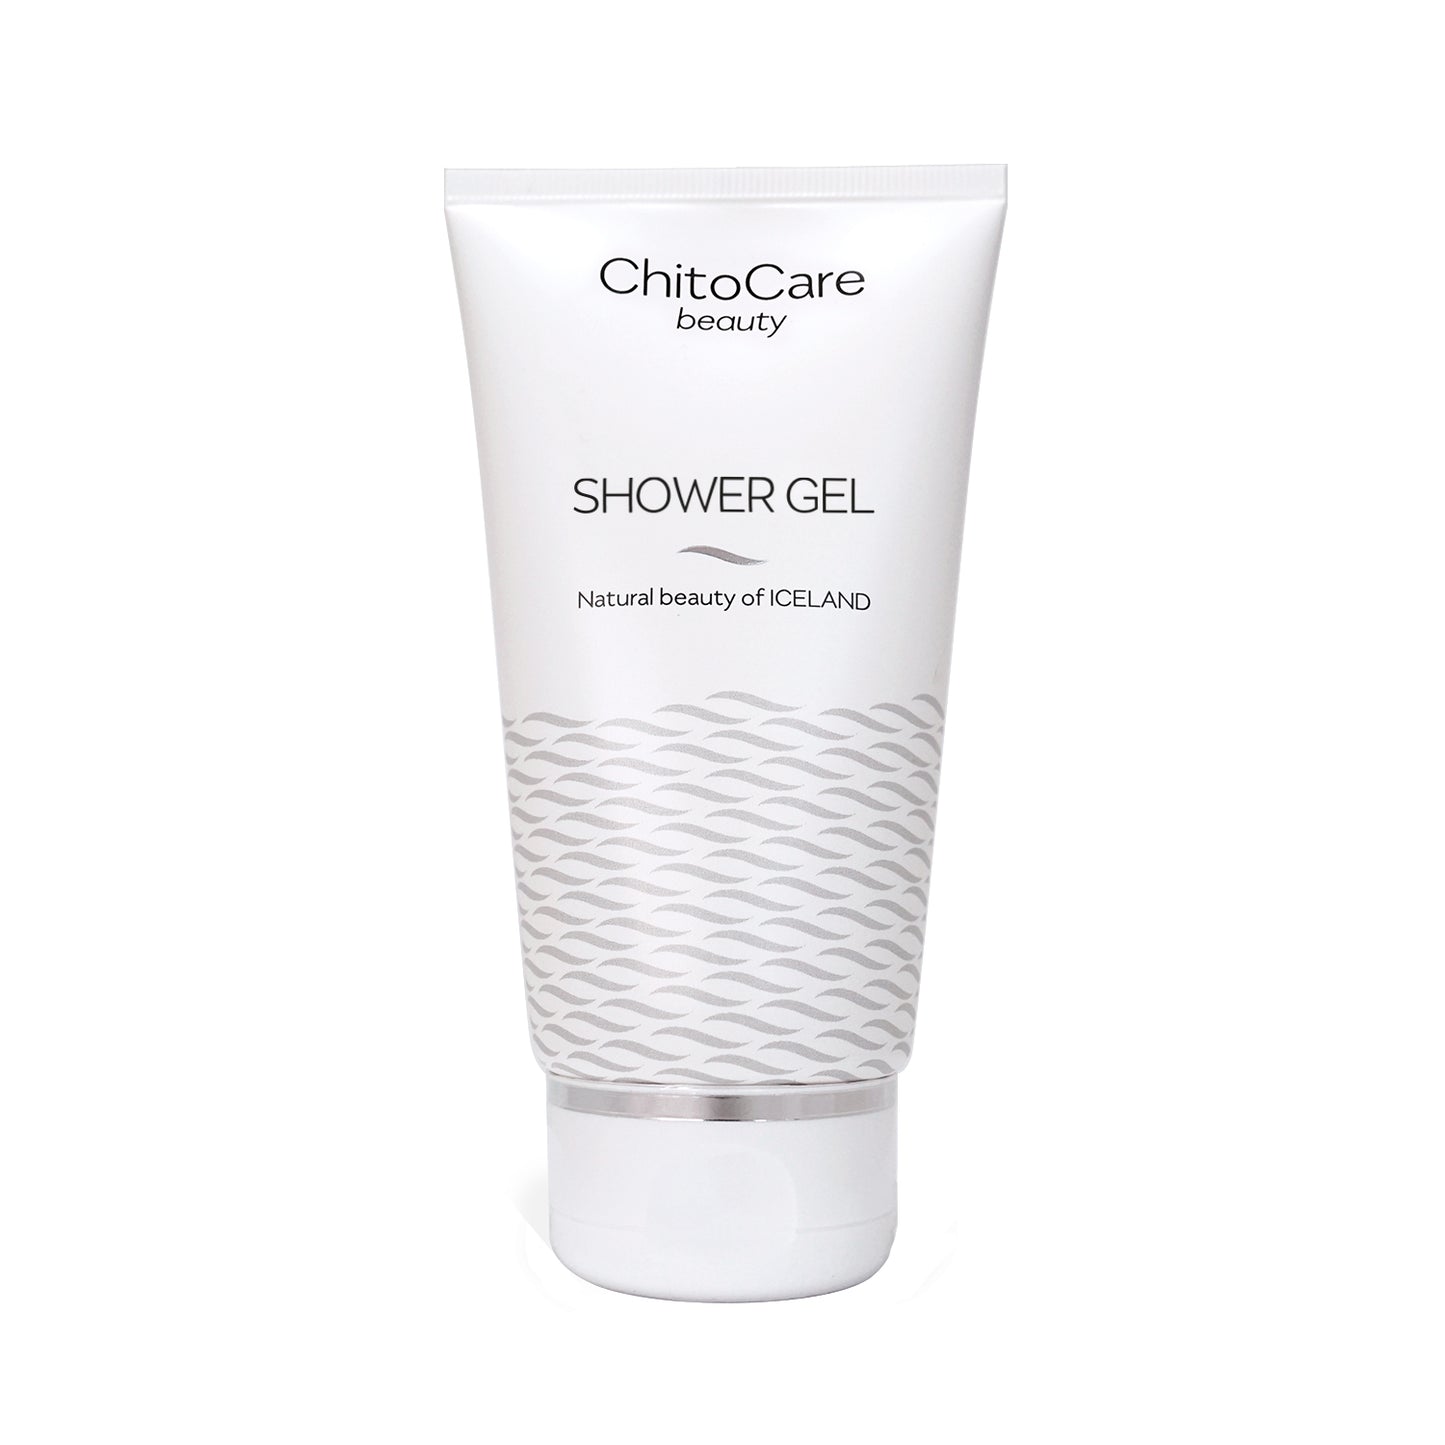 ChitoCare Shower Gel 150ml